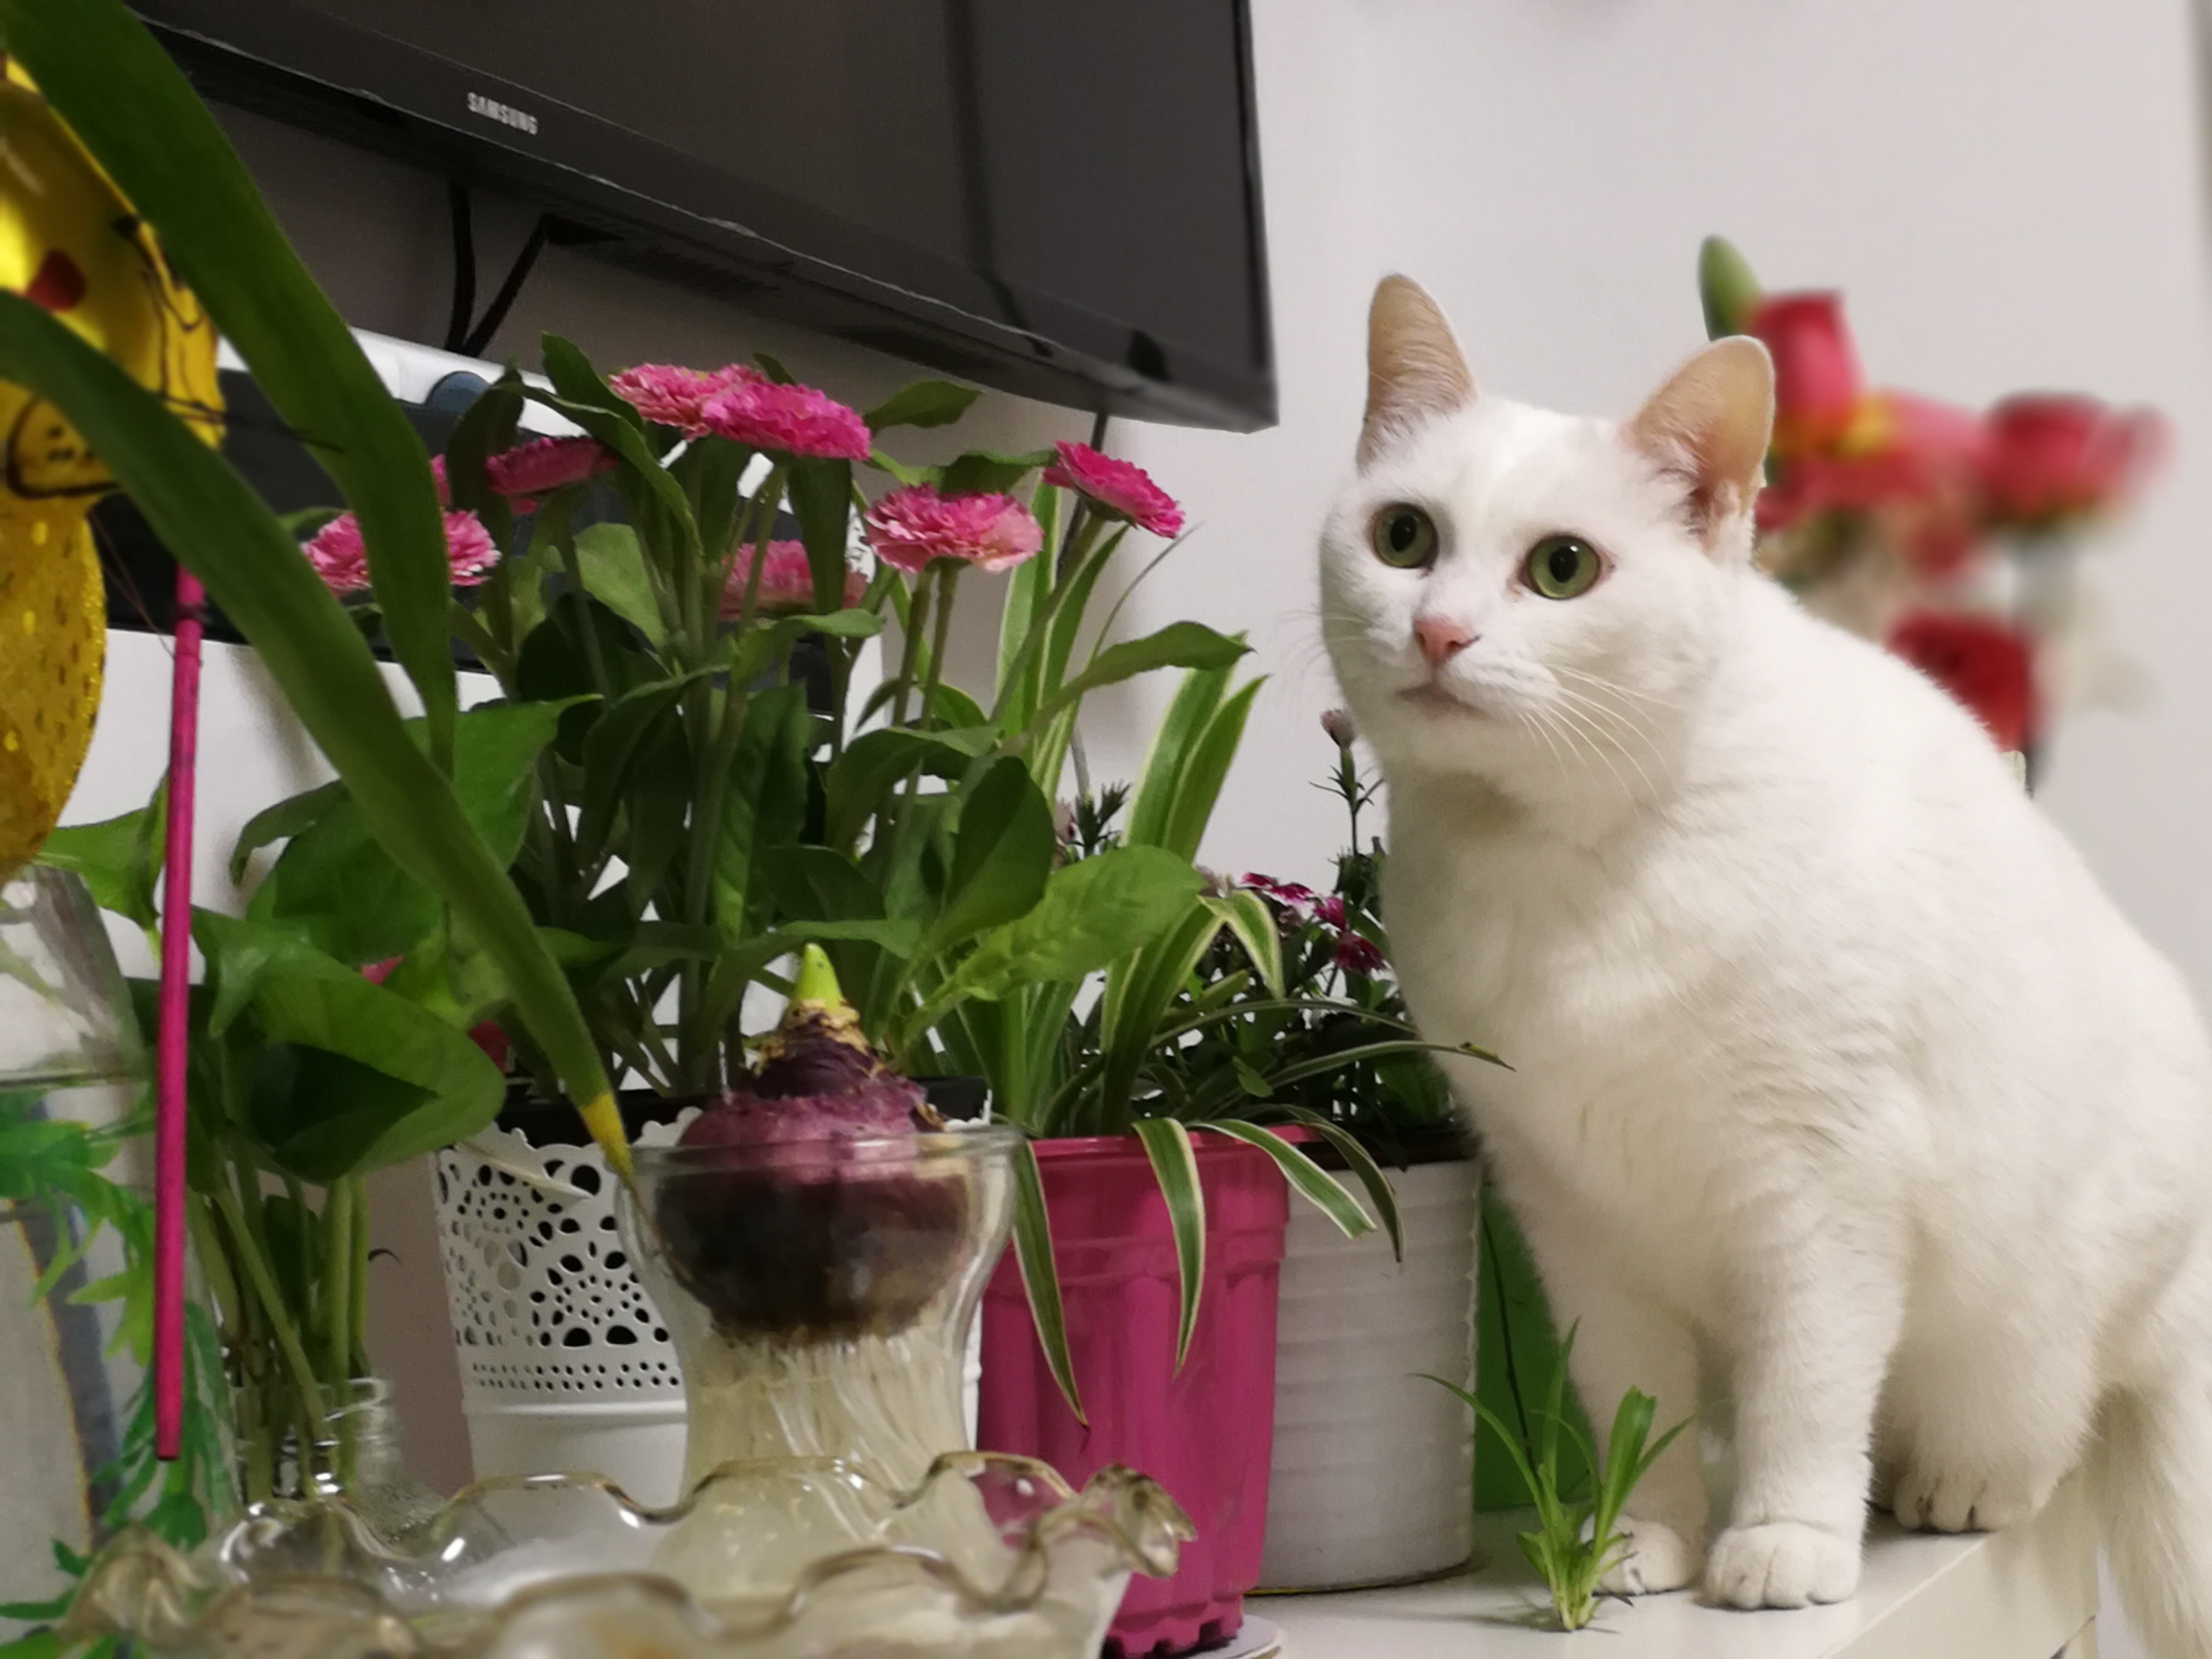 Xi Yangyang, a 12-year-old cat, sits near a flower in Tao's home in Nanjing, China. /Courtesy of Tao Fuwen